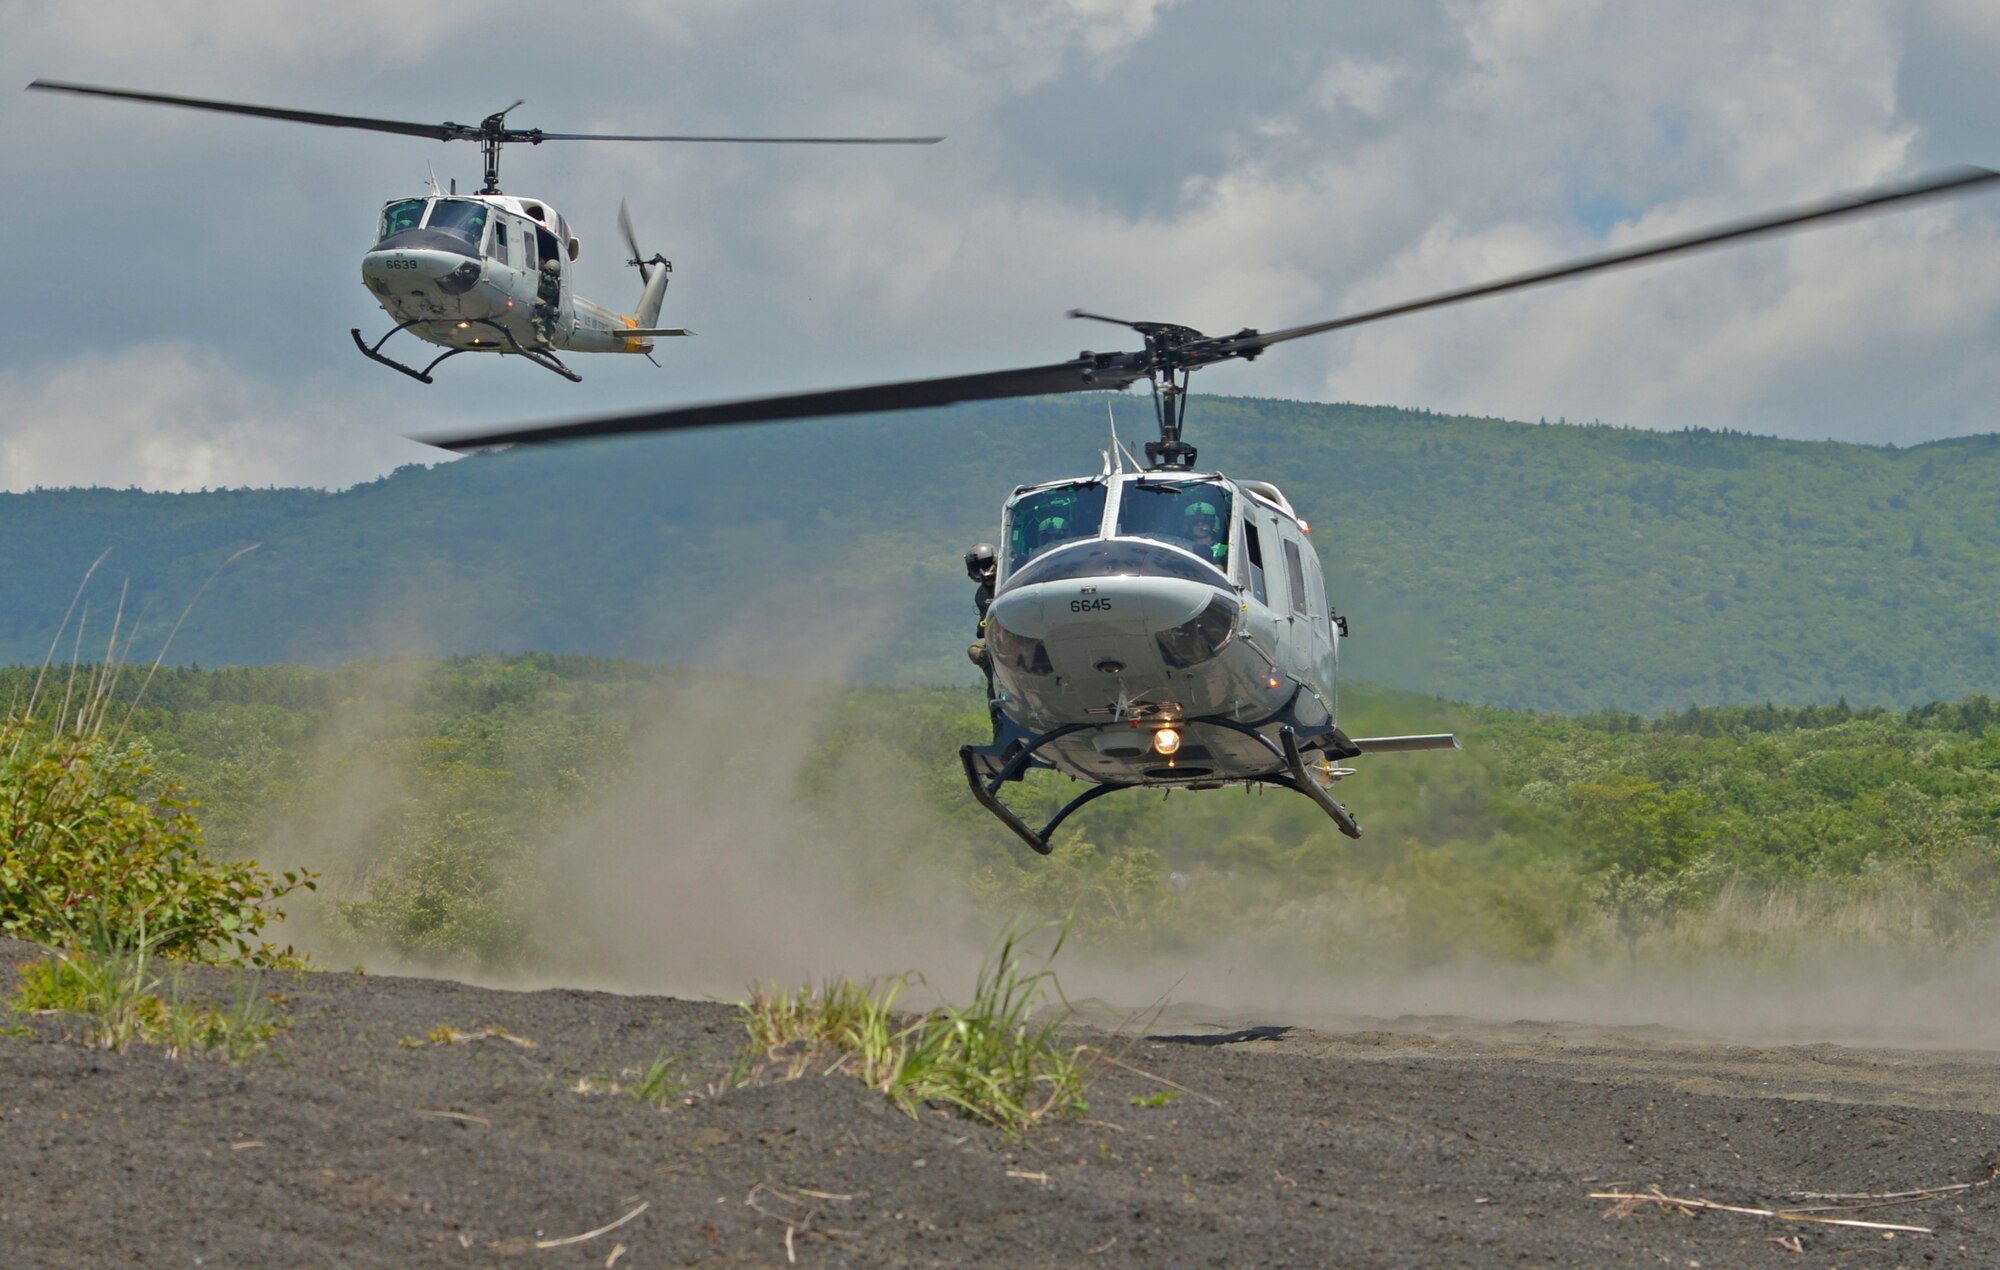 Two UH-1N Iroquois with the 459th Airlift Squadron take off from a drop zone near Mt. Fuji, Japan, June 3, 2016. The 459 AS regularly conducts training missions to remain proficient with flight skills necessary to support contingencies. (U.S. Air Force photo by Senior Airman David Owsianka/Released)